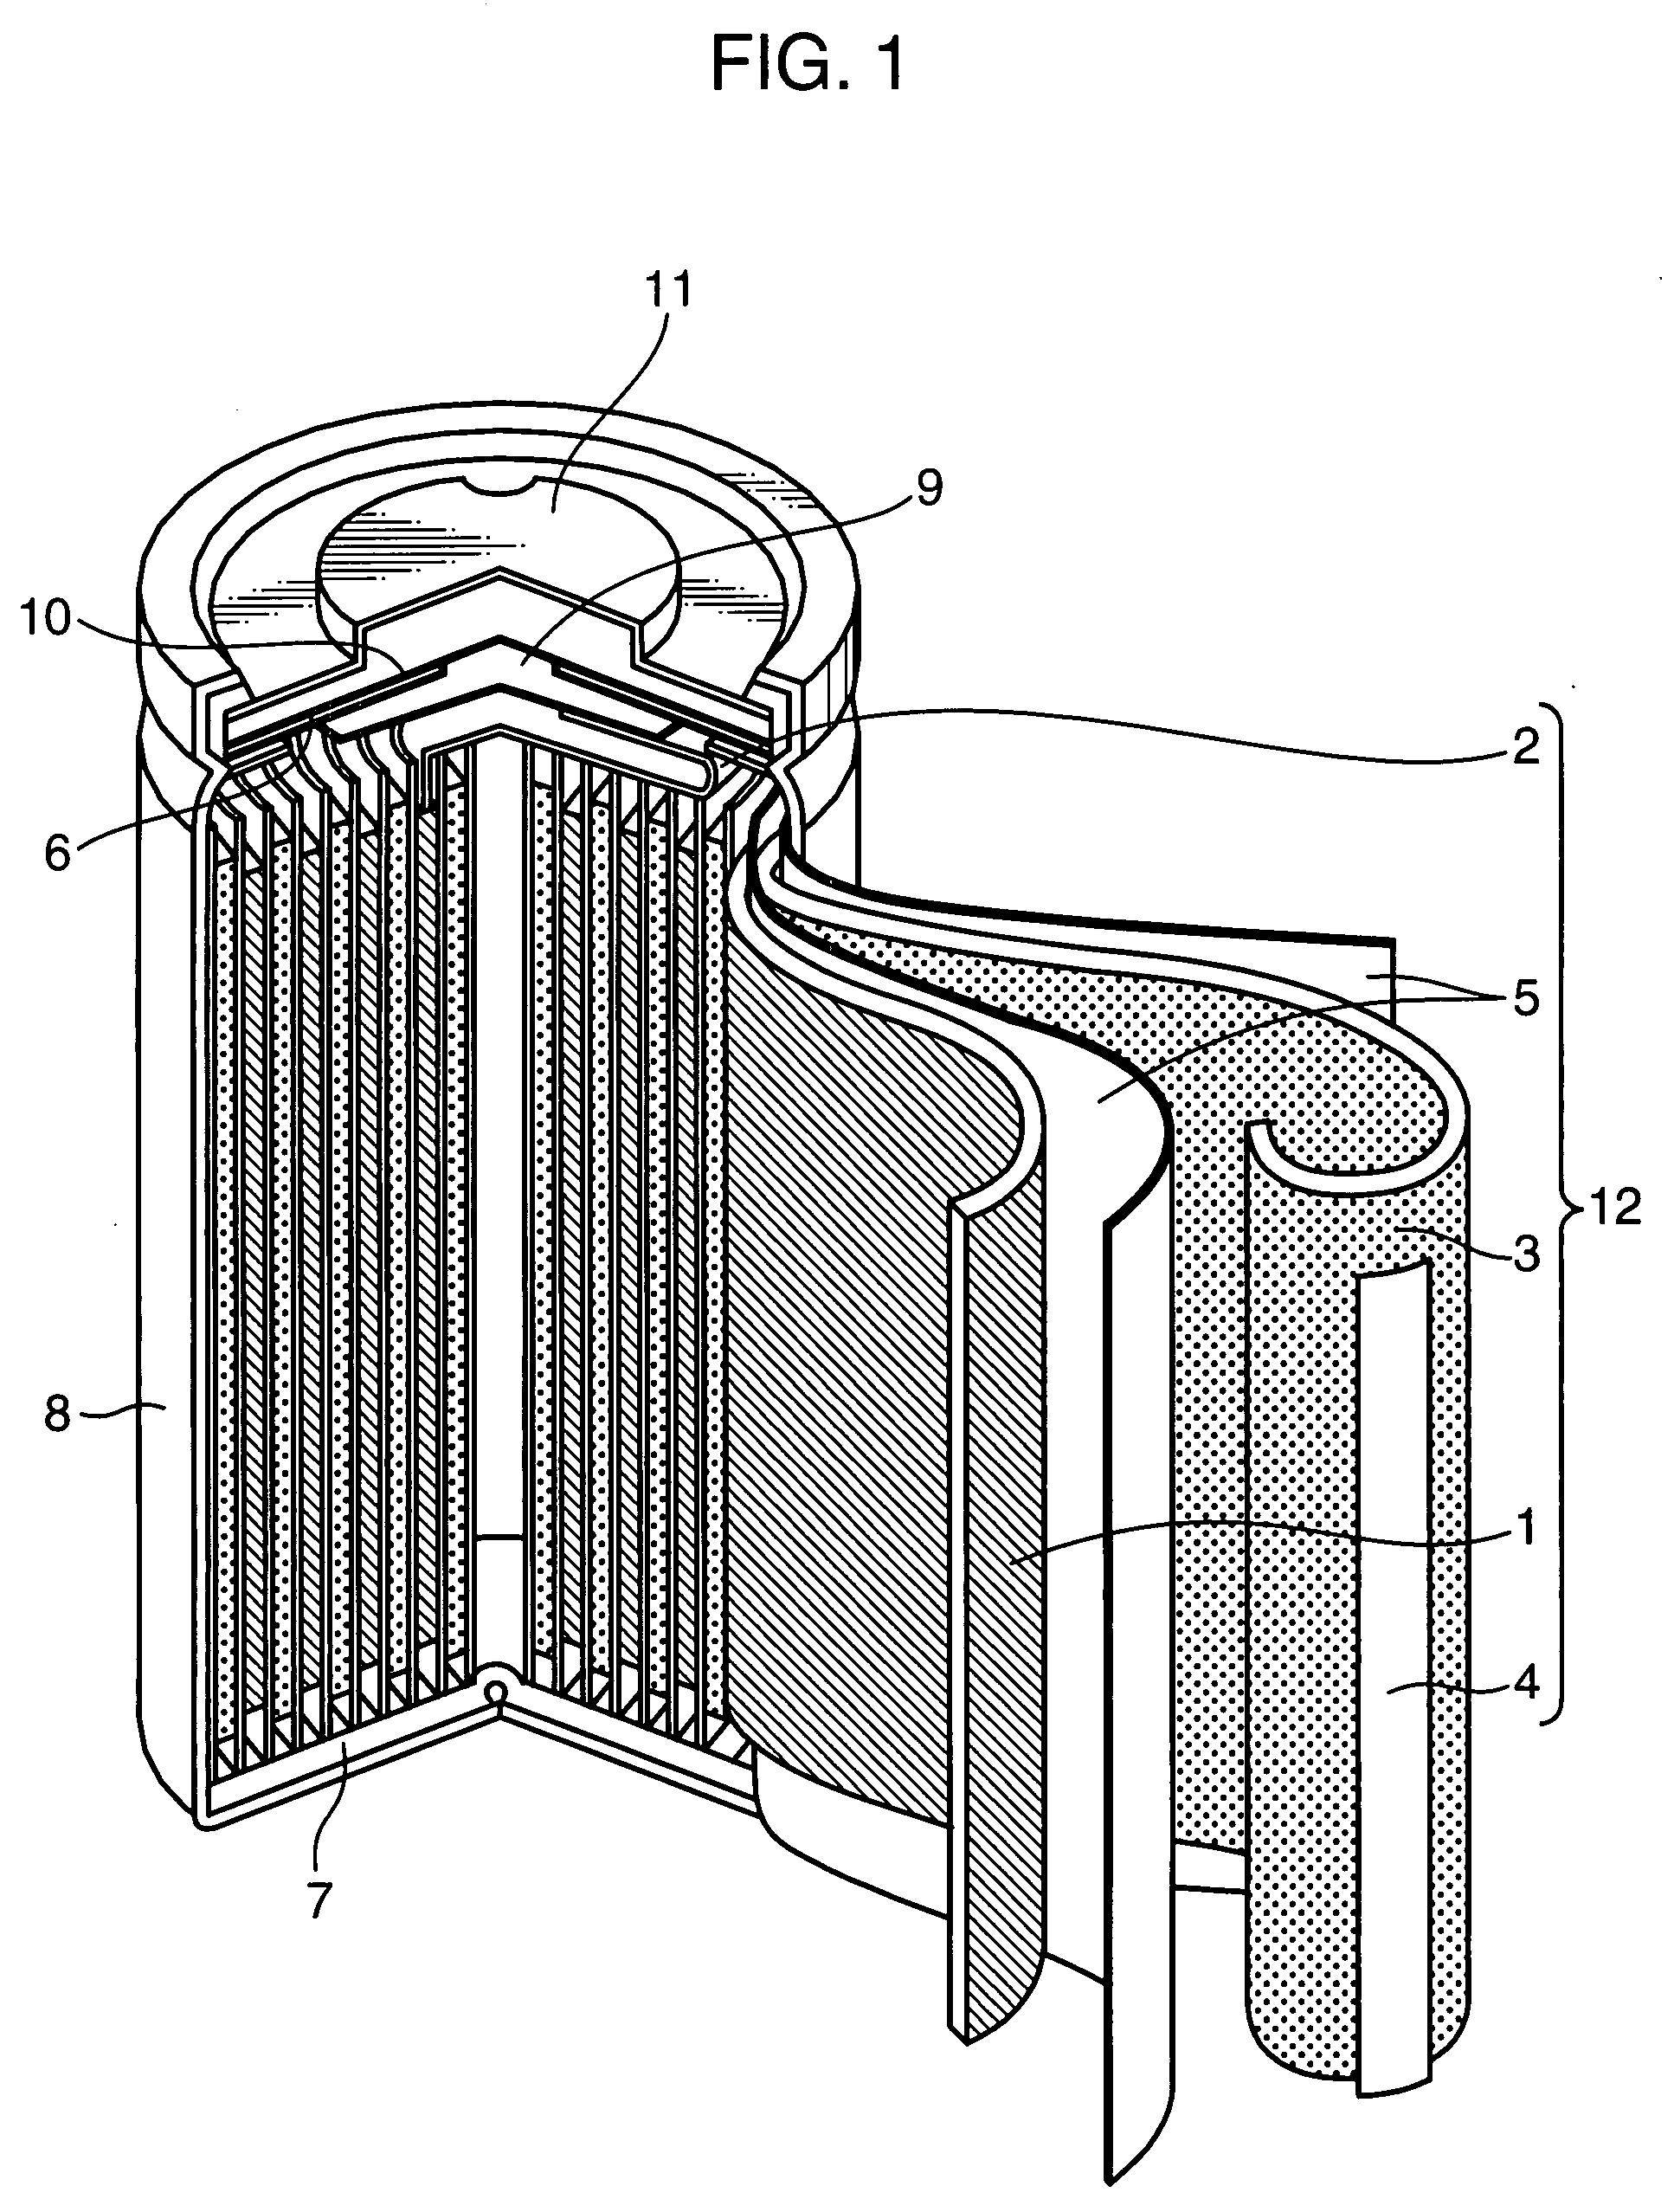 Nonaqueous electrolyte secondary battery and method of producing the same